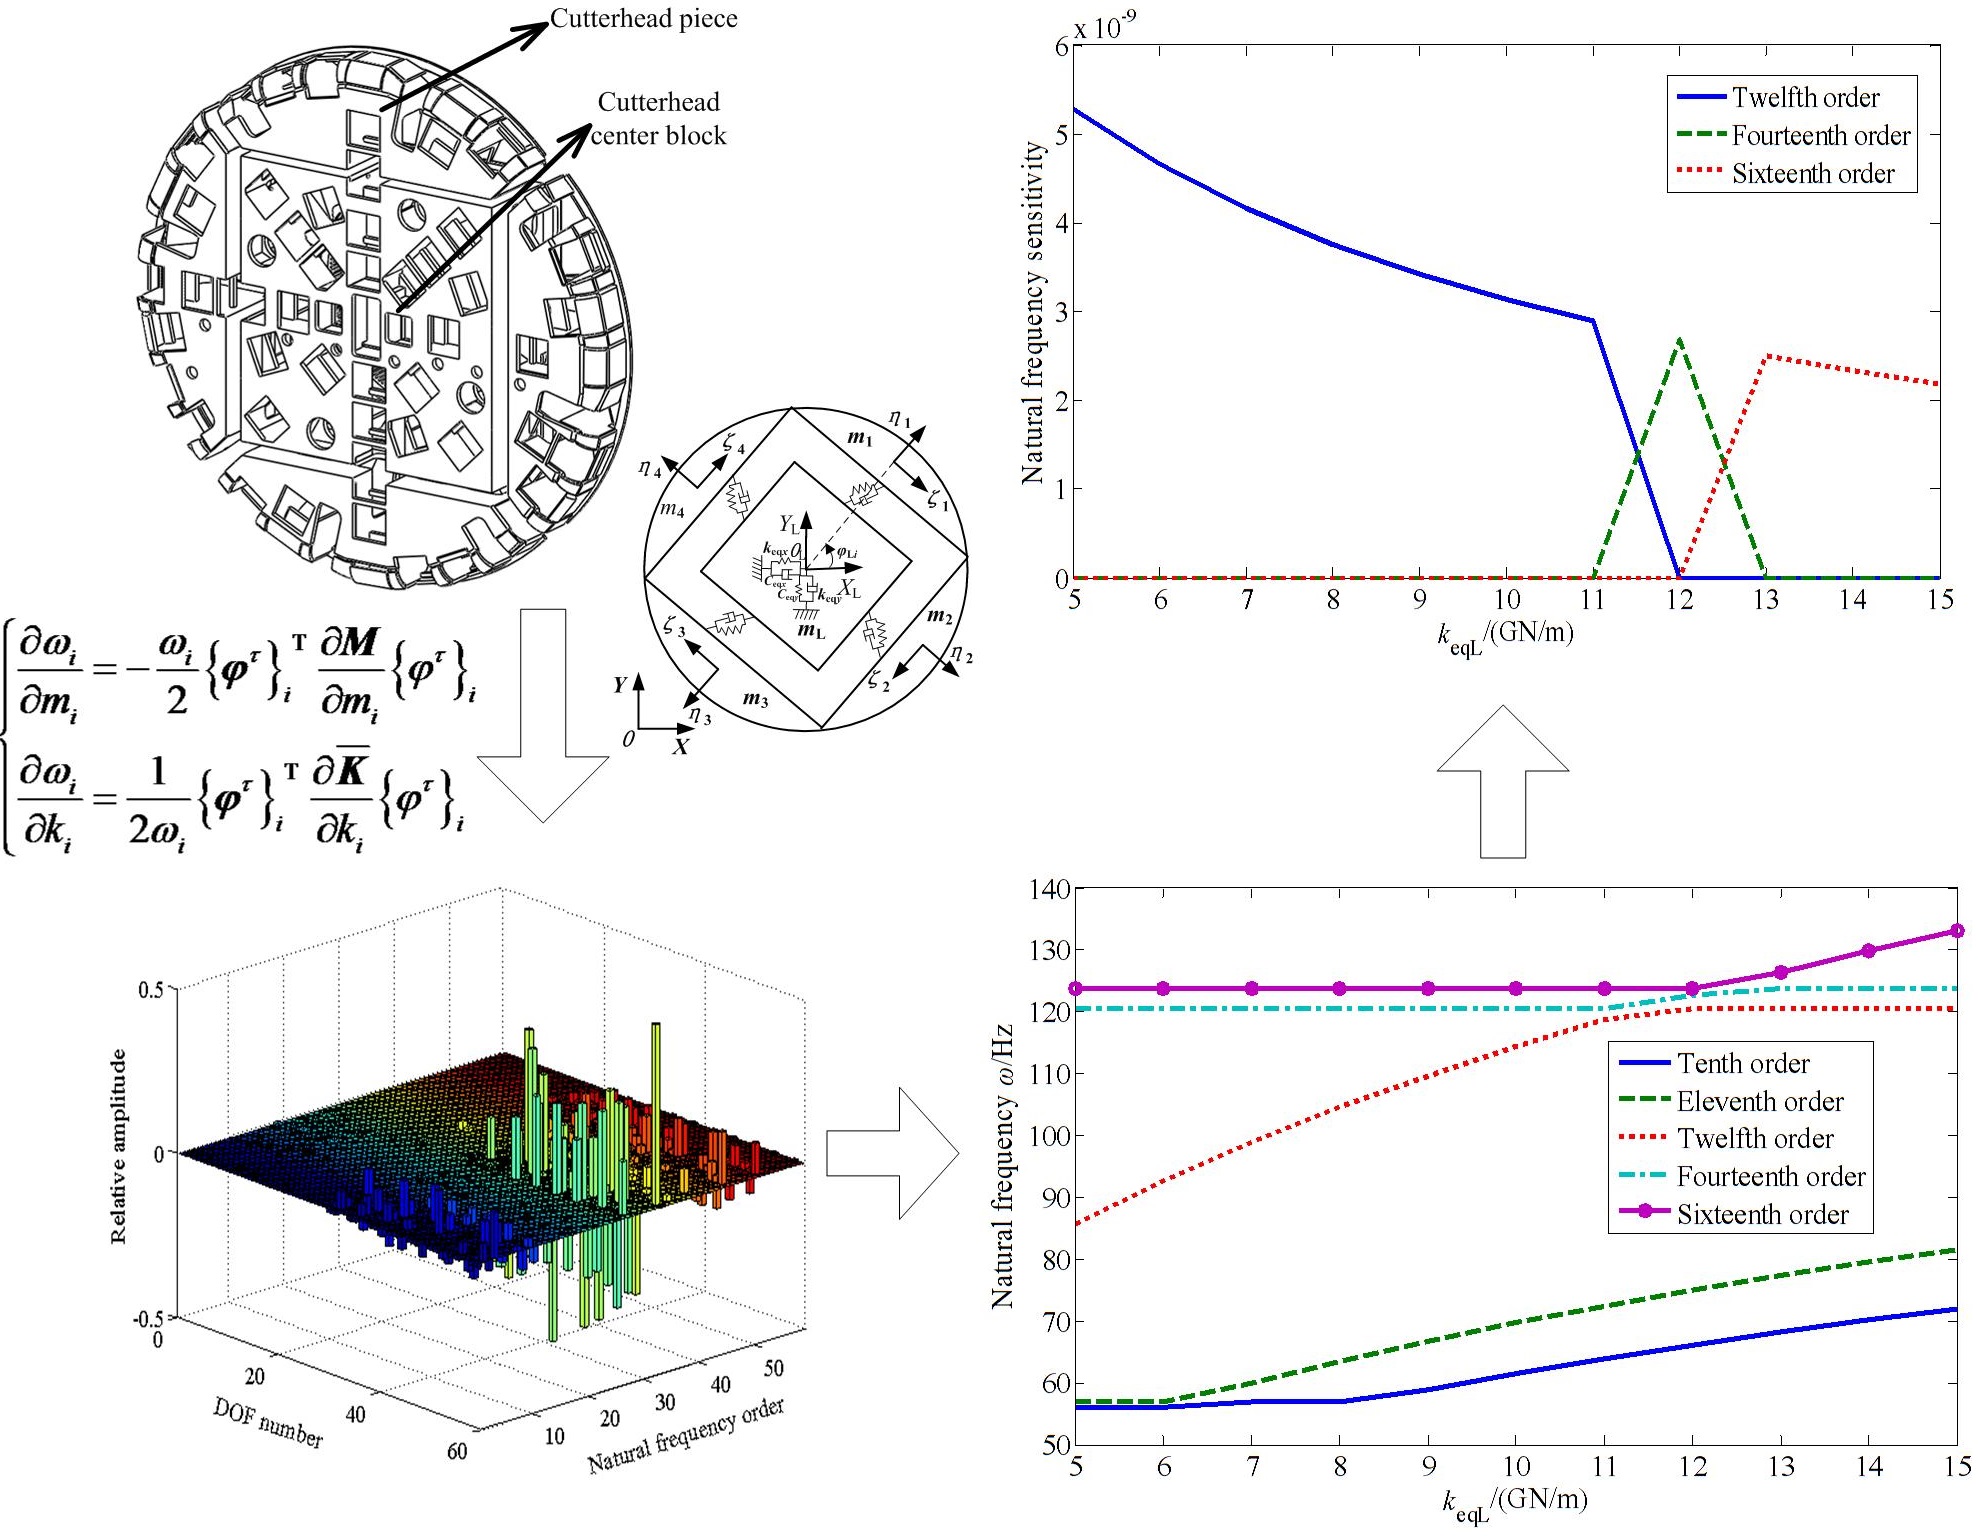 Natural frequency sensitivity and influence analysis of TBM cutterhead system